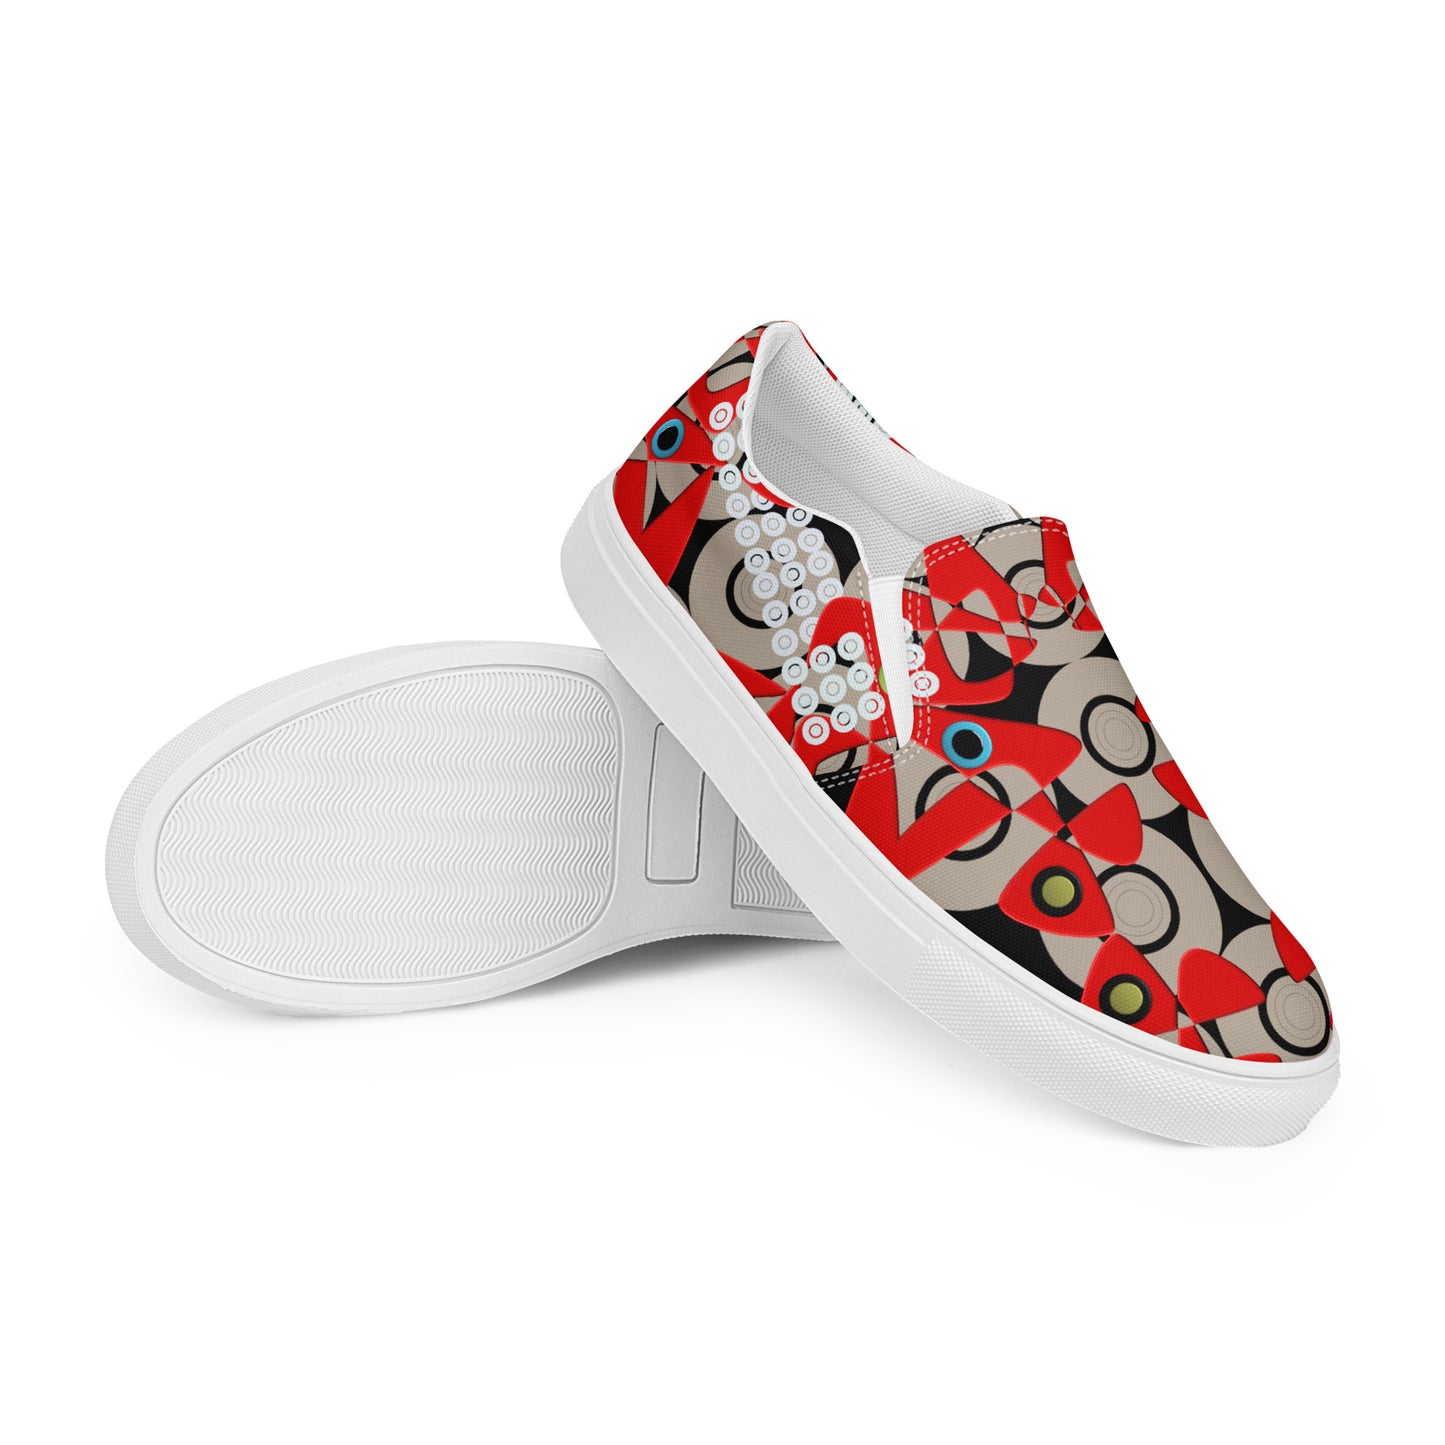 Women’s Medley slip-on canvas shoes GY2